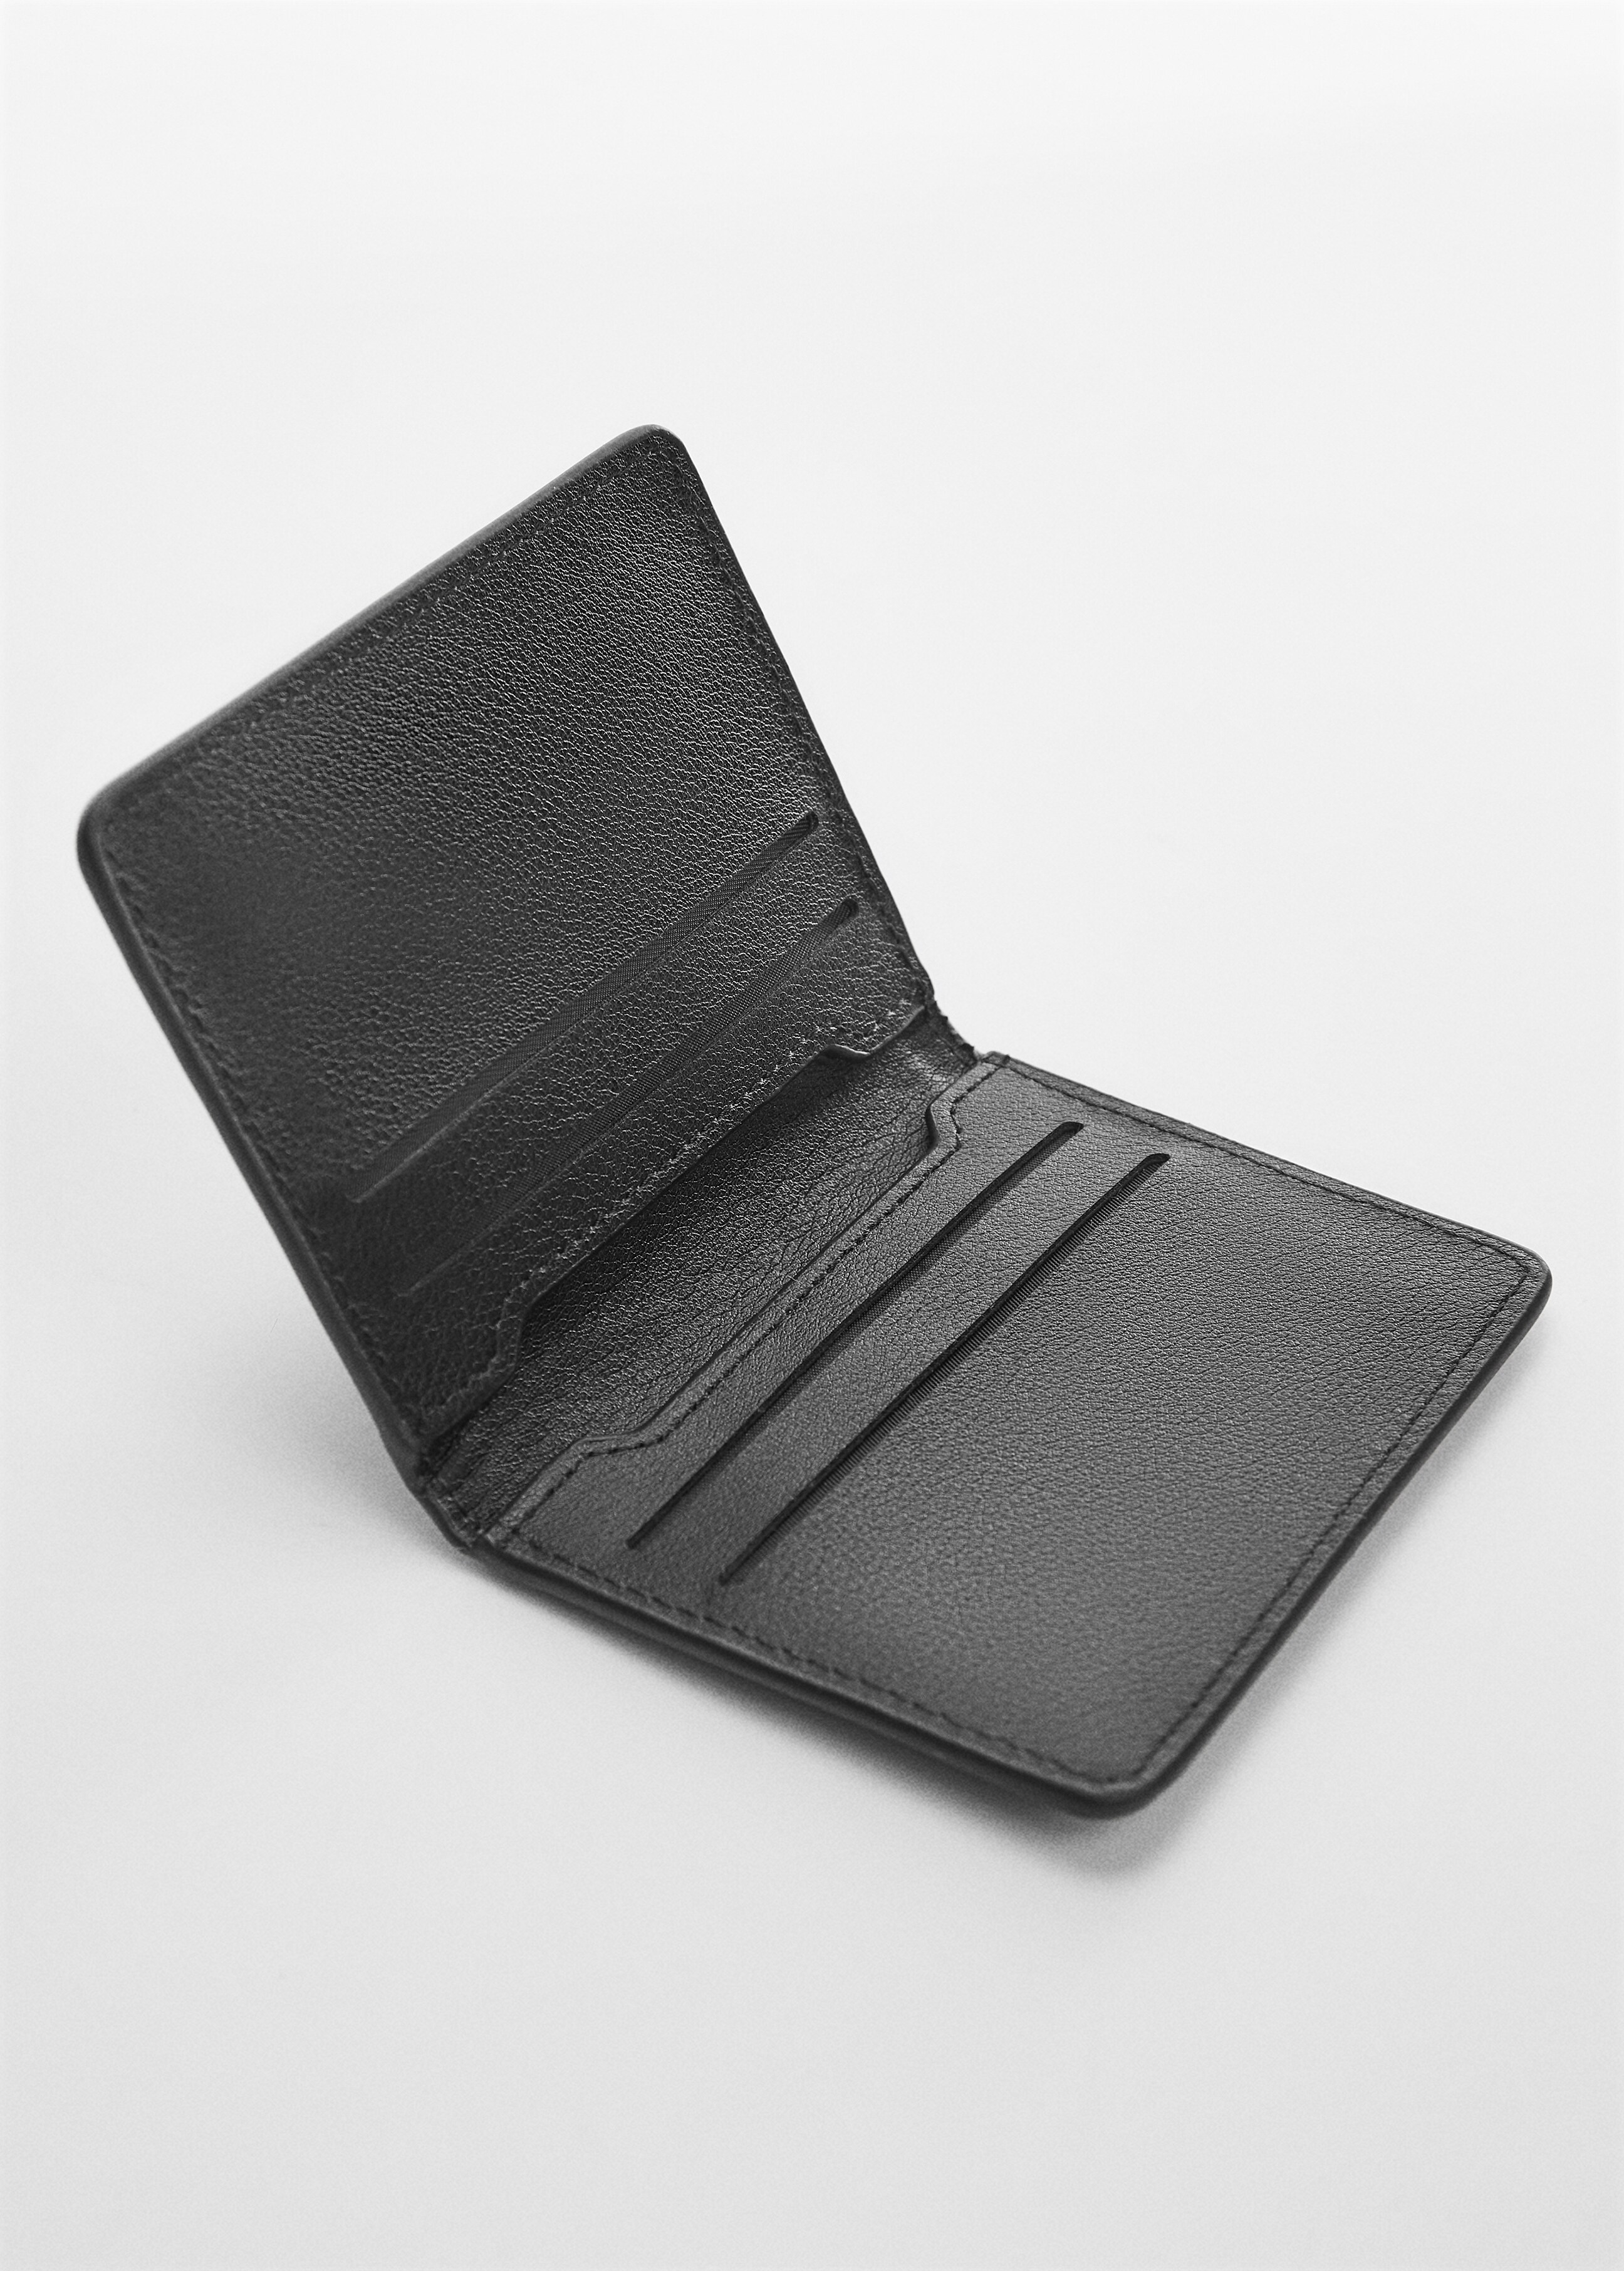 Anti-contactless leather card holder - Medium plane